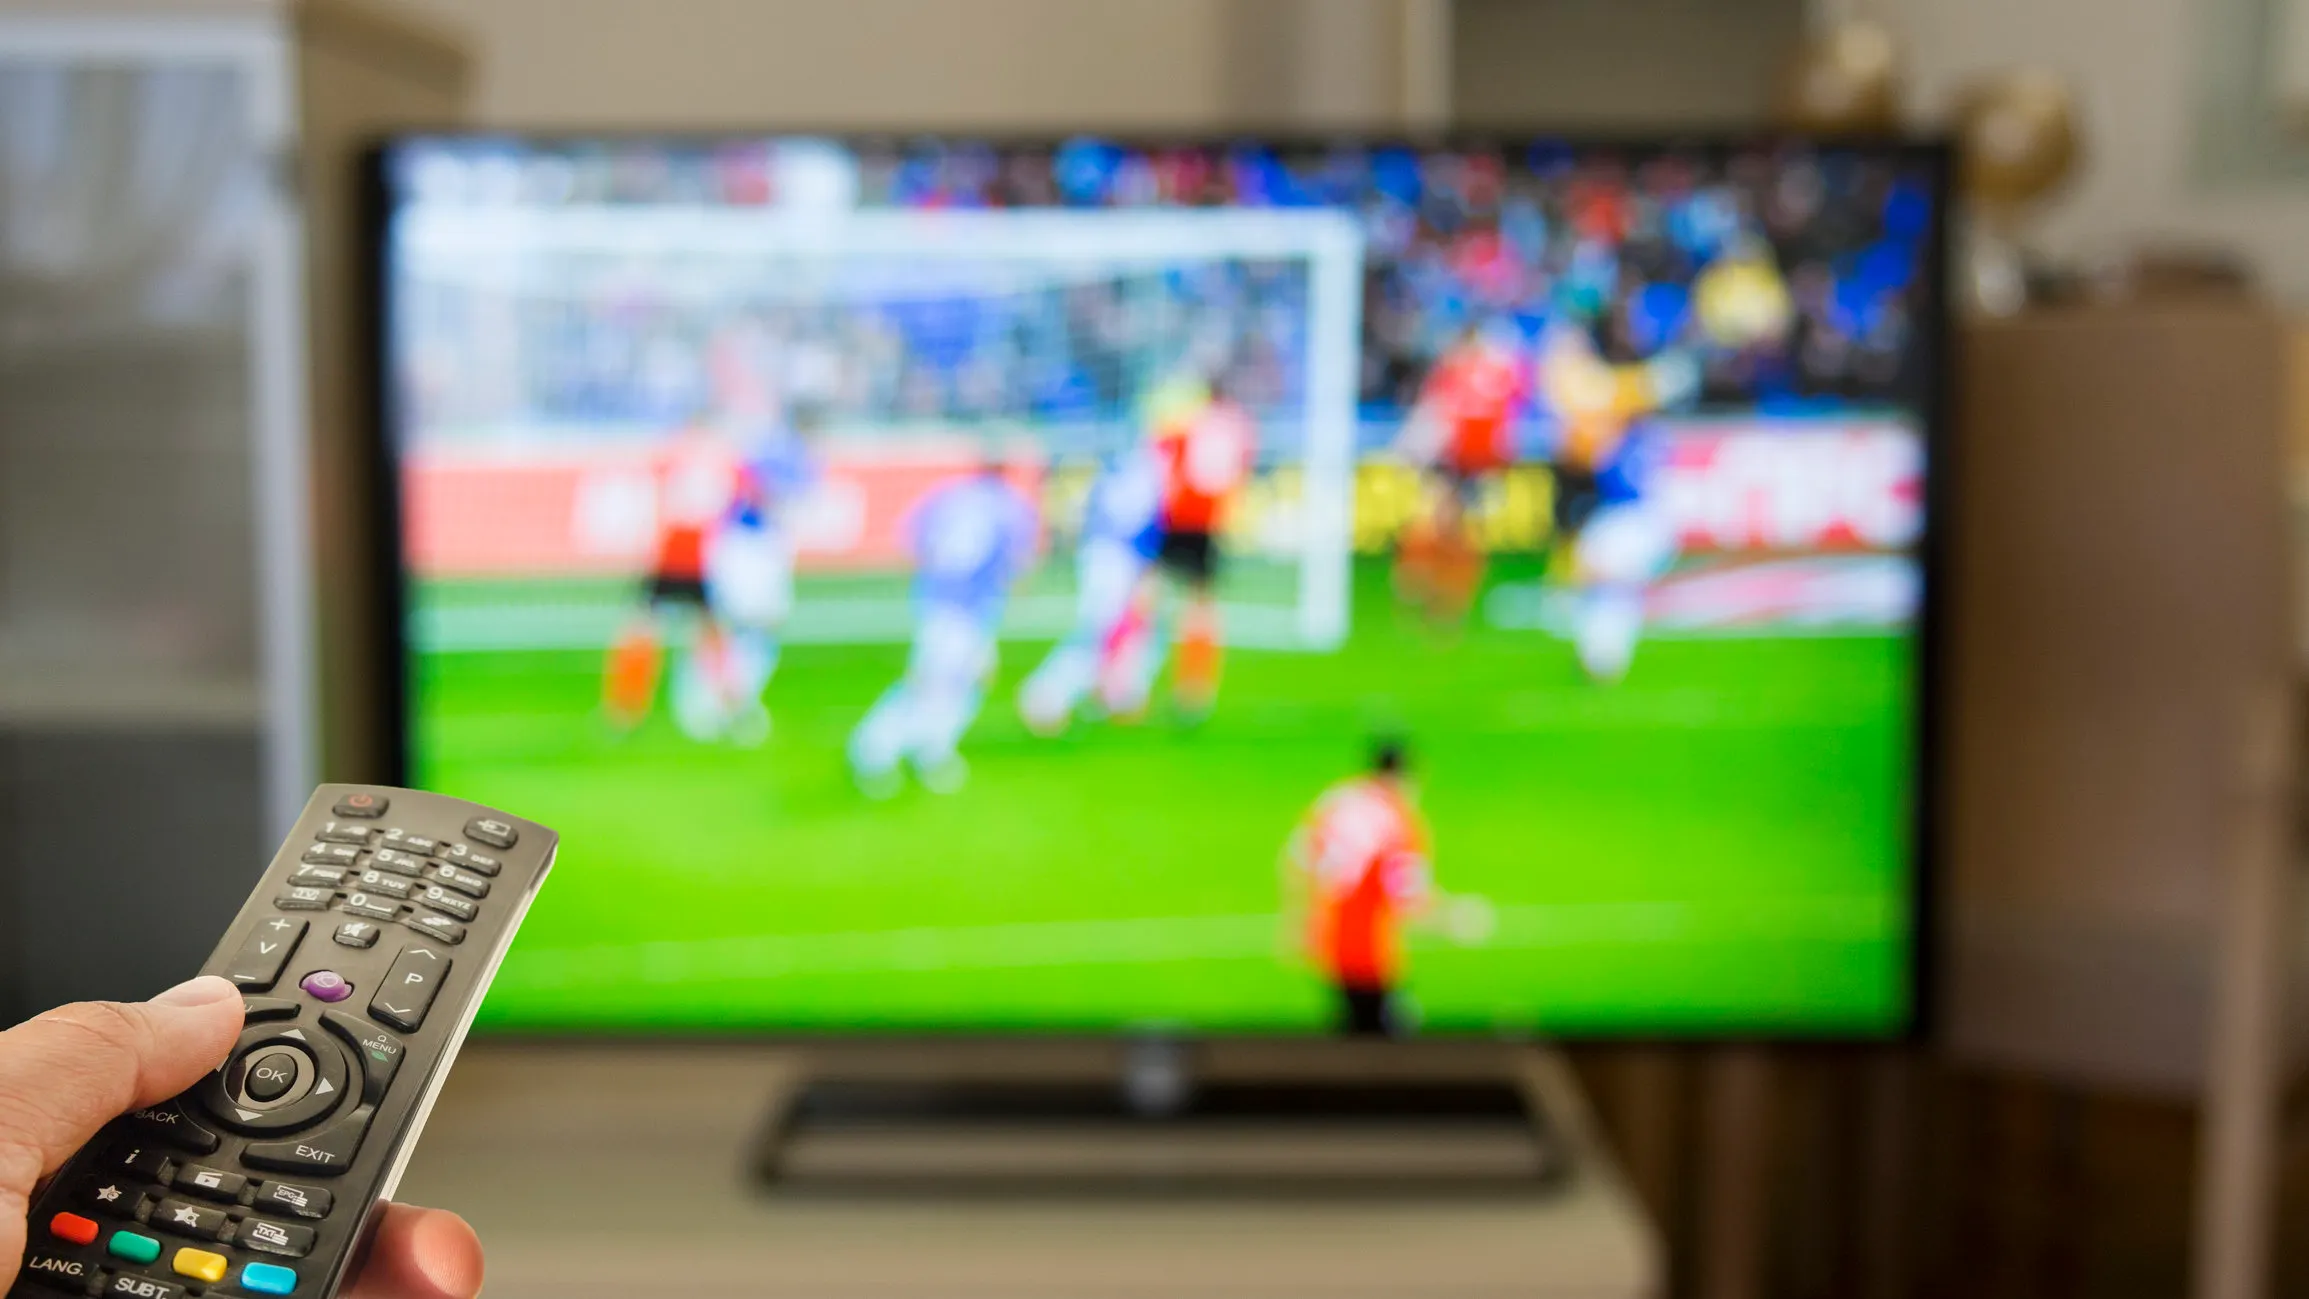 TV viewers will have to pay a premium to watch FIFA World Cup